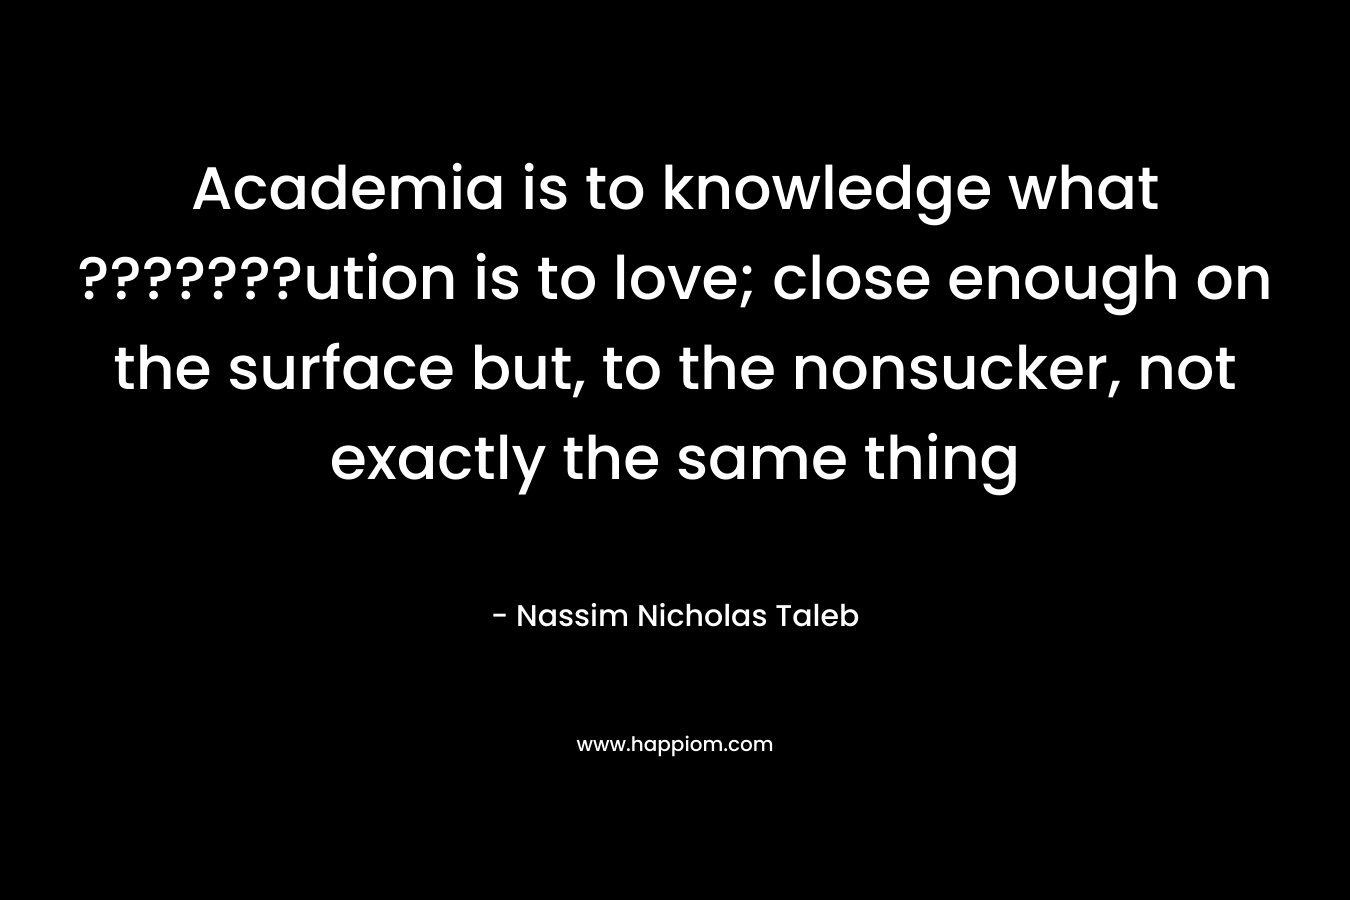 Academia is to knowledge what ???????ution is to love; close enough on the surface but, to the nonsucker, not exactly the same thing